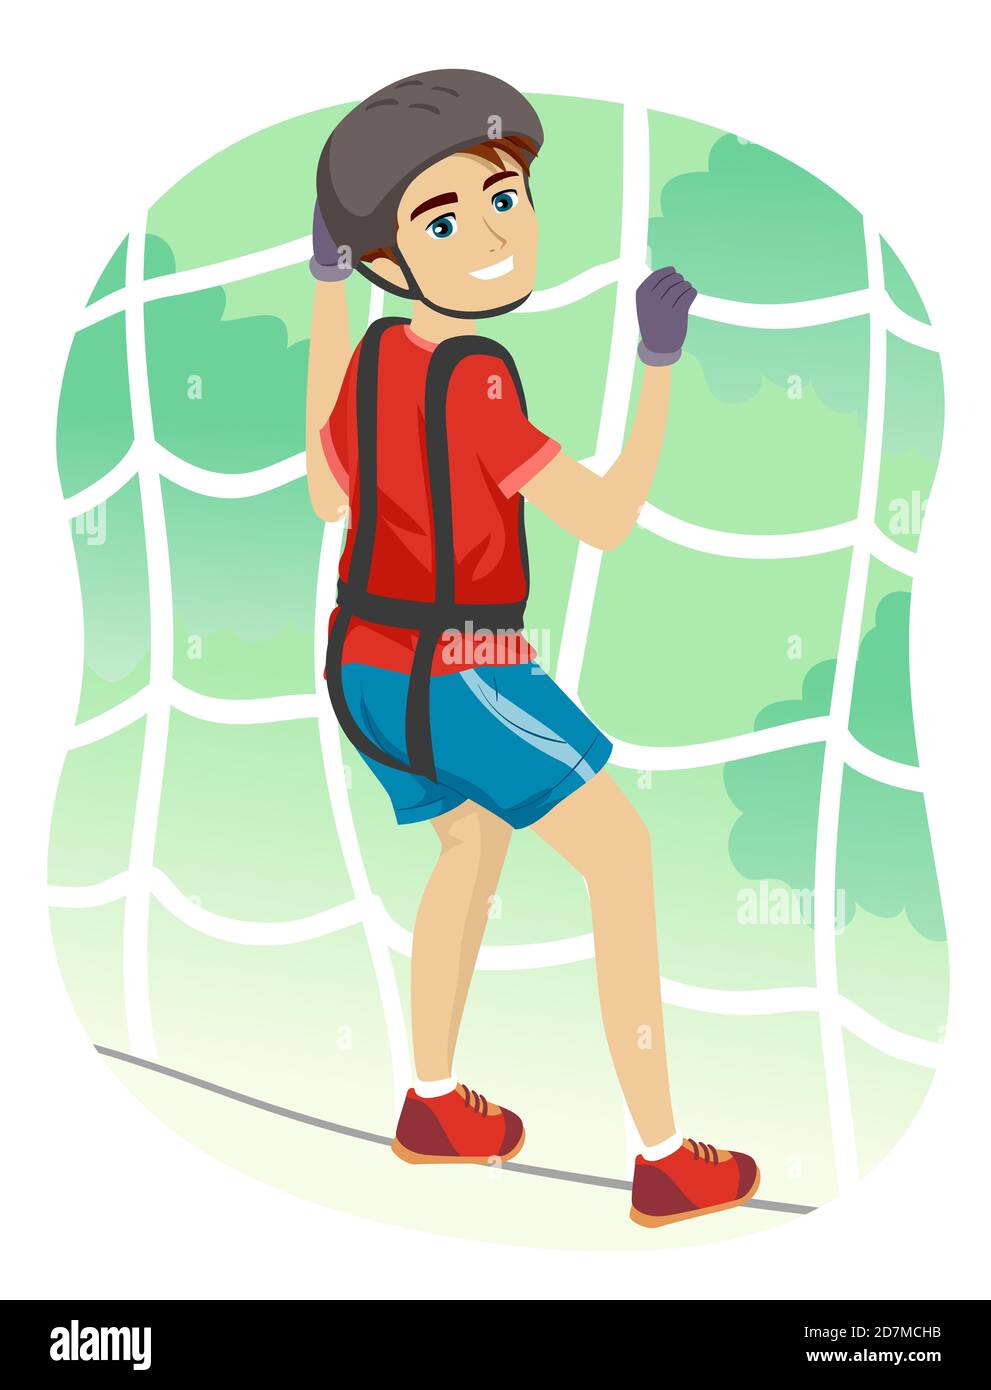 Illustration of a Teenage Guy Wearing Helmet and Safety Harness Traversing a Net in an Adventure Park Stock Photo